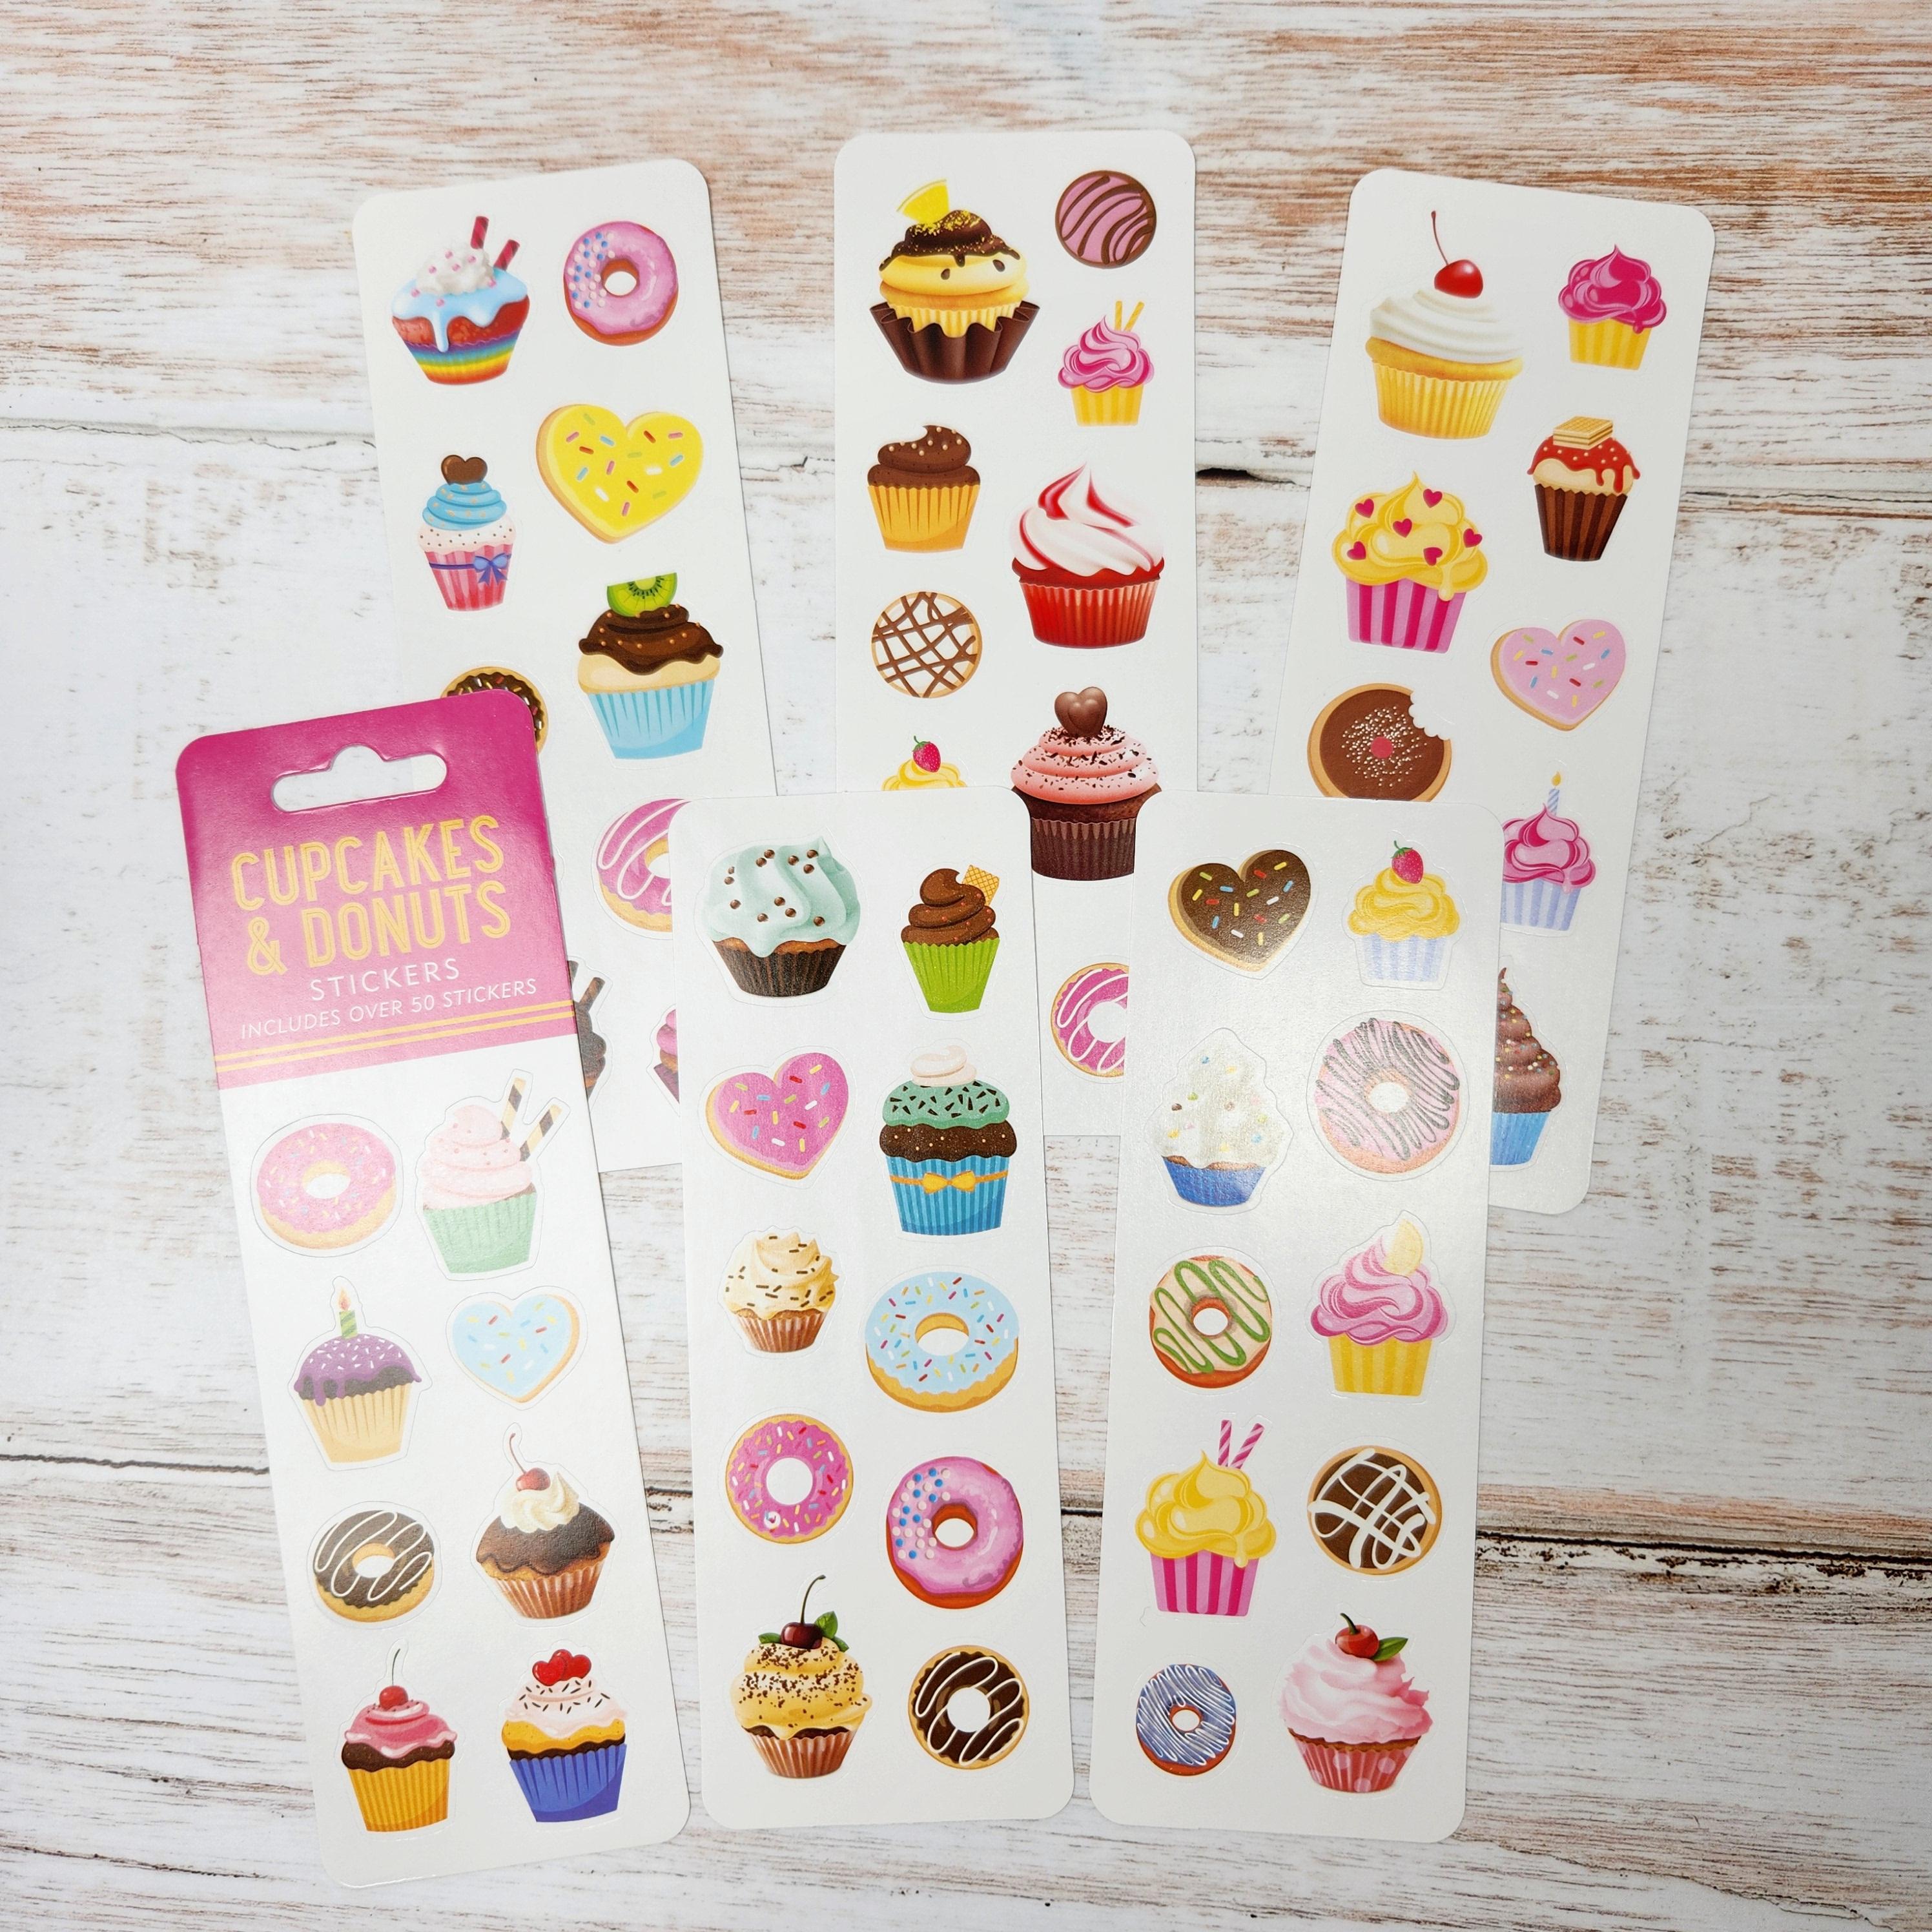 Peter Pauper Press Cupcakes & Donuts Sticker Set 6 sheets with deserts and cupcakes - Paper Kooka Australia